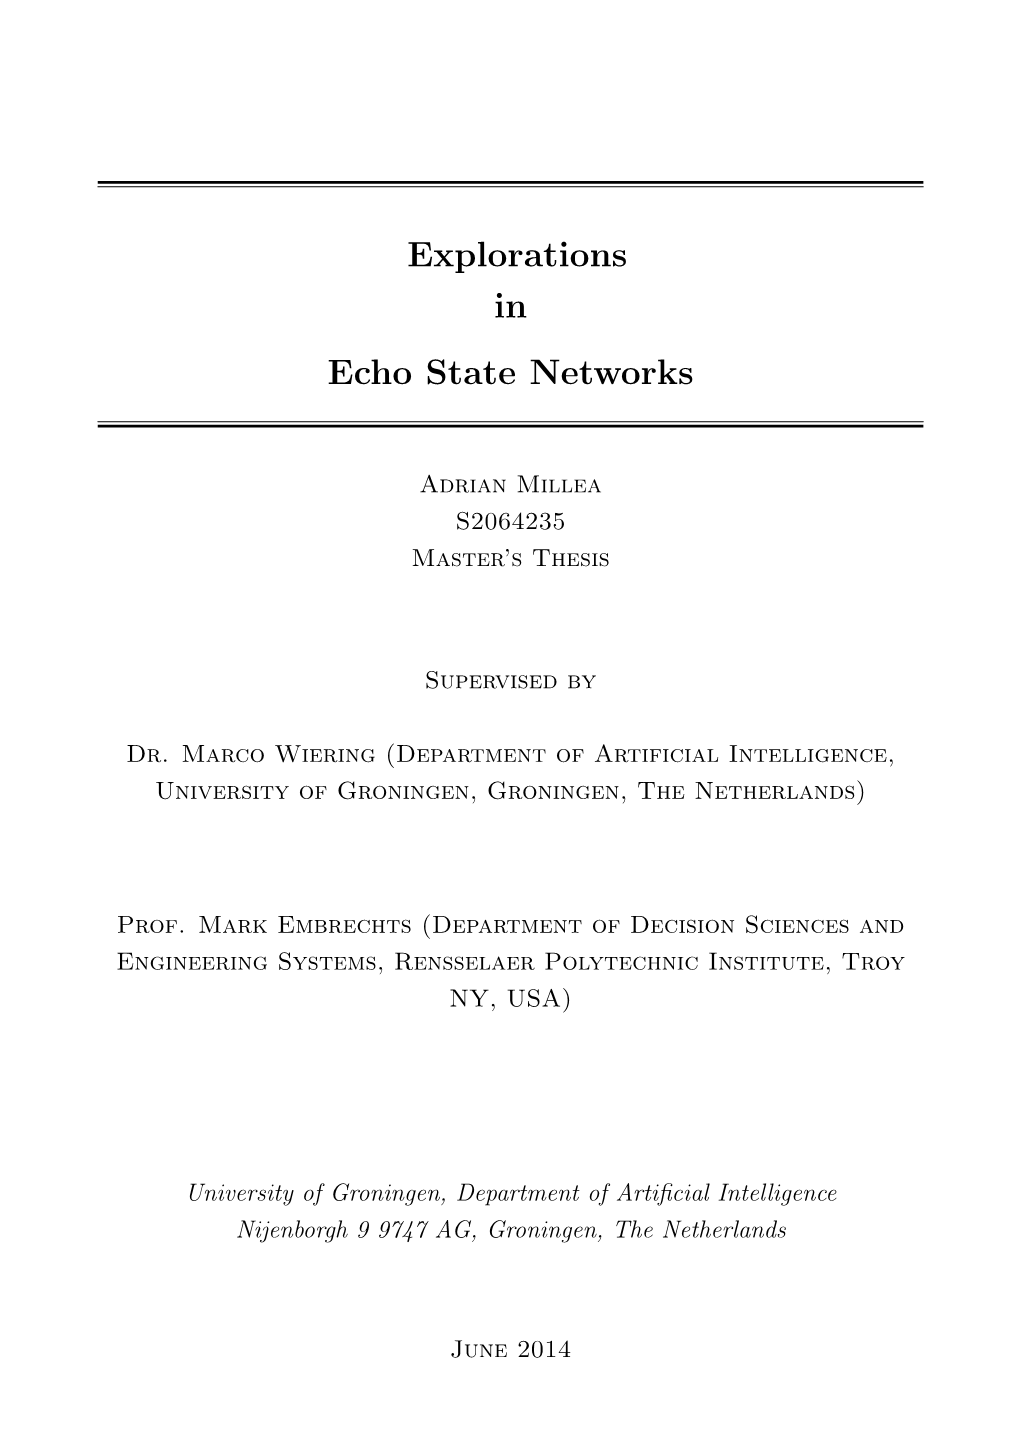 Explorations in Echo State Networks